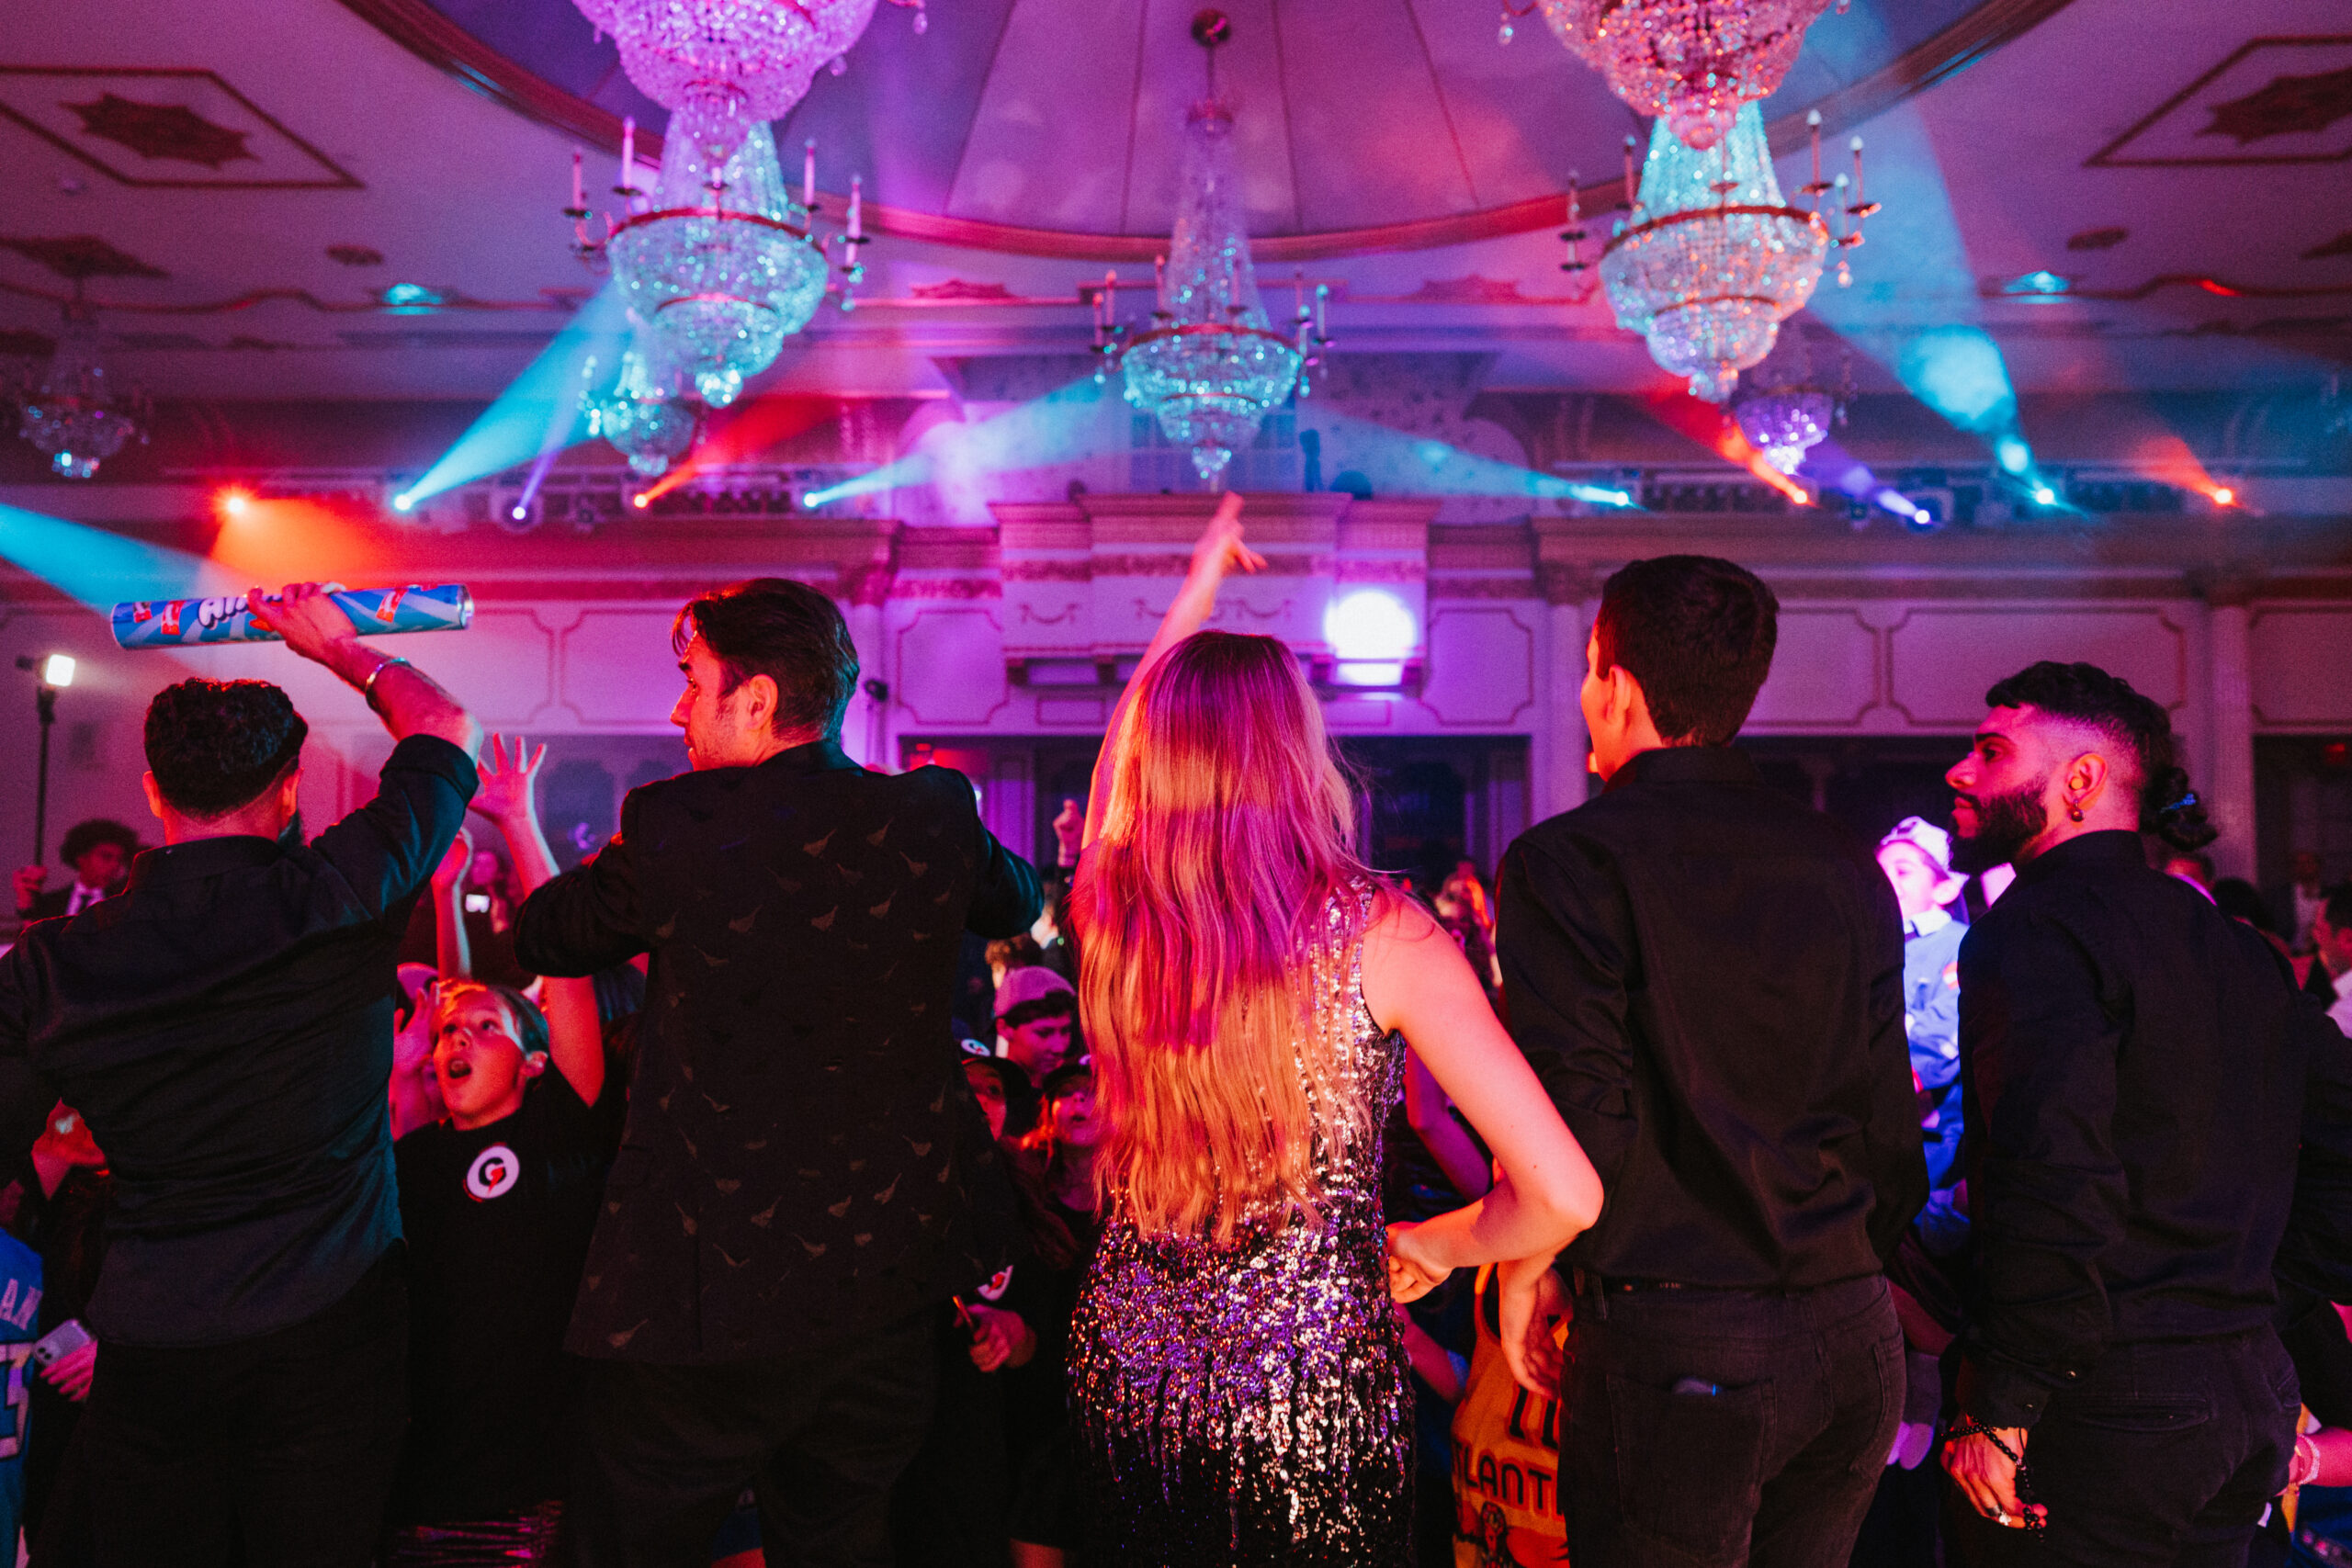 Guests stand on stage facing crowd and dance in Crystal Plaza's Grand Ballroom.